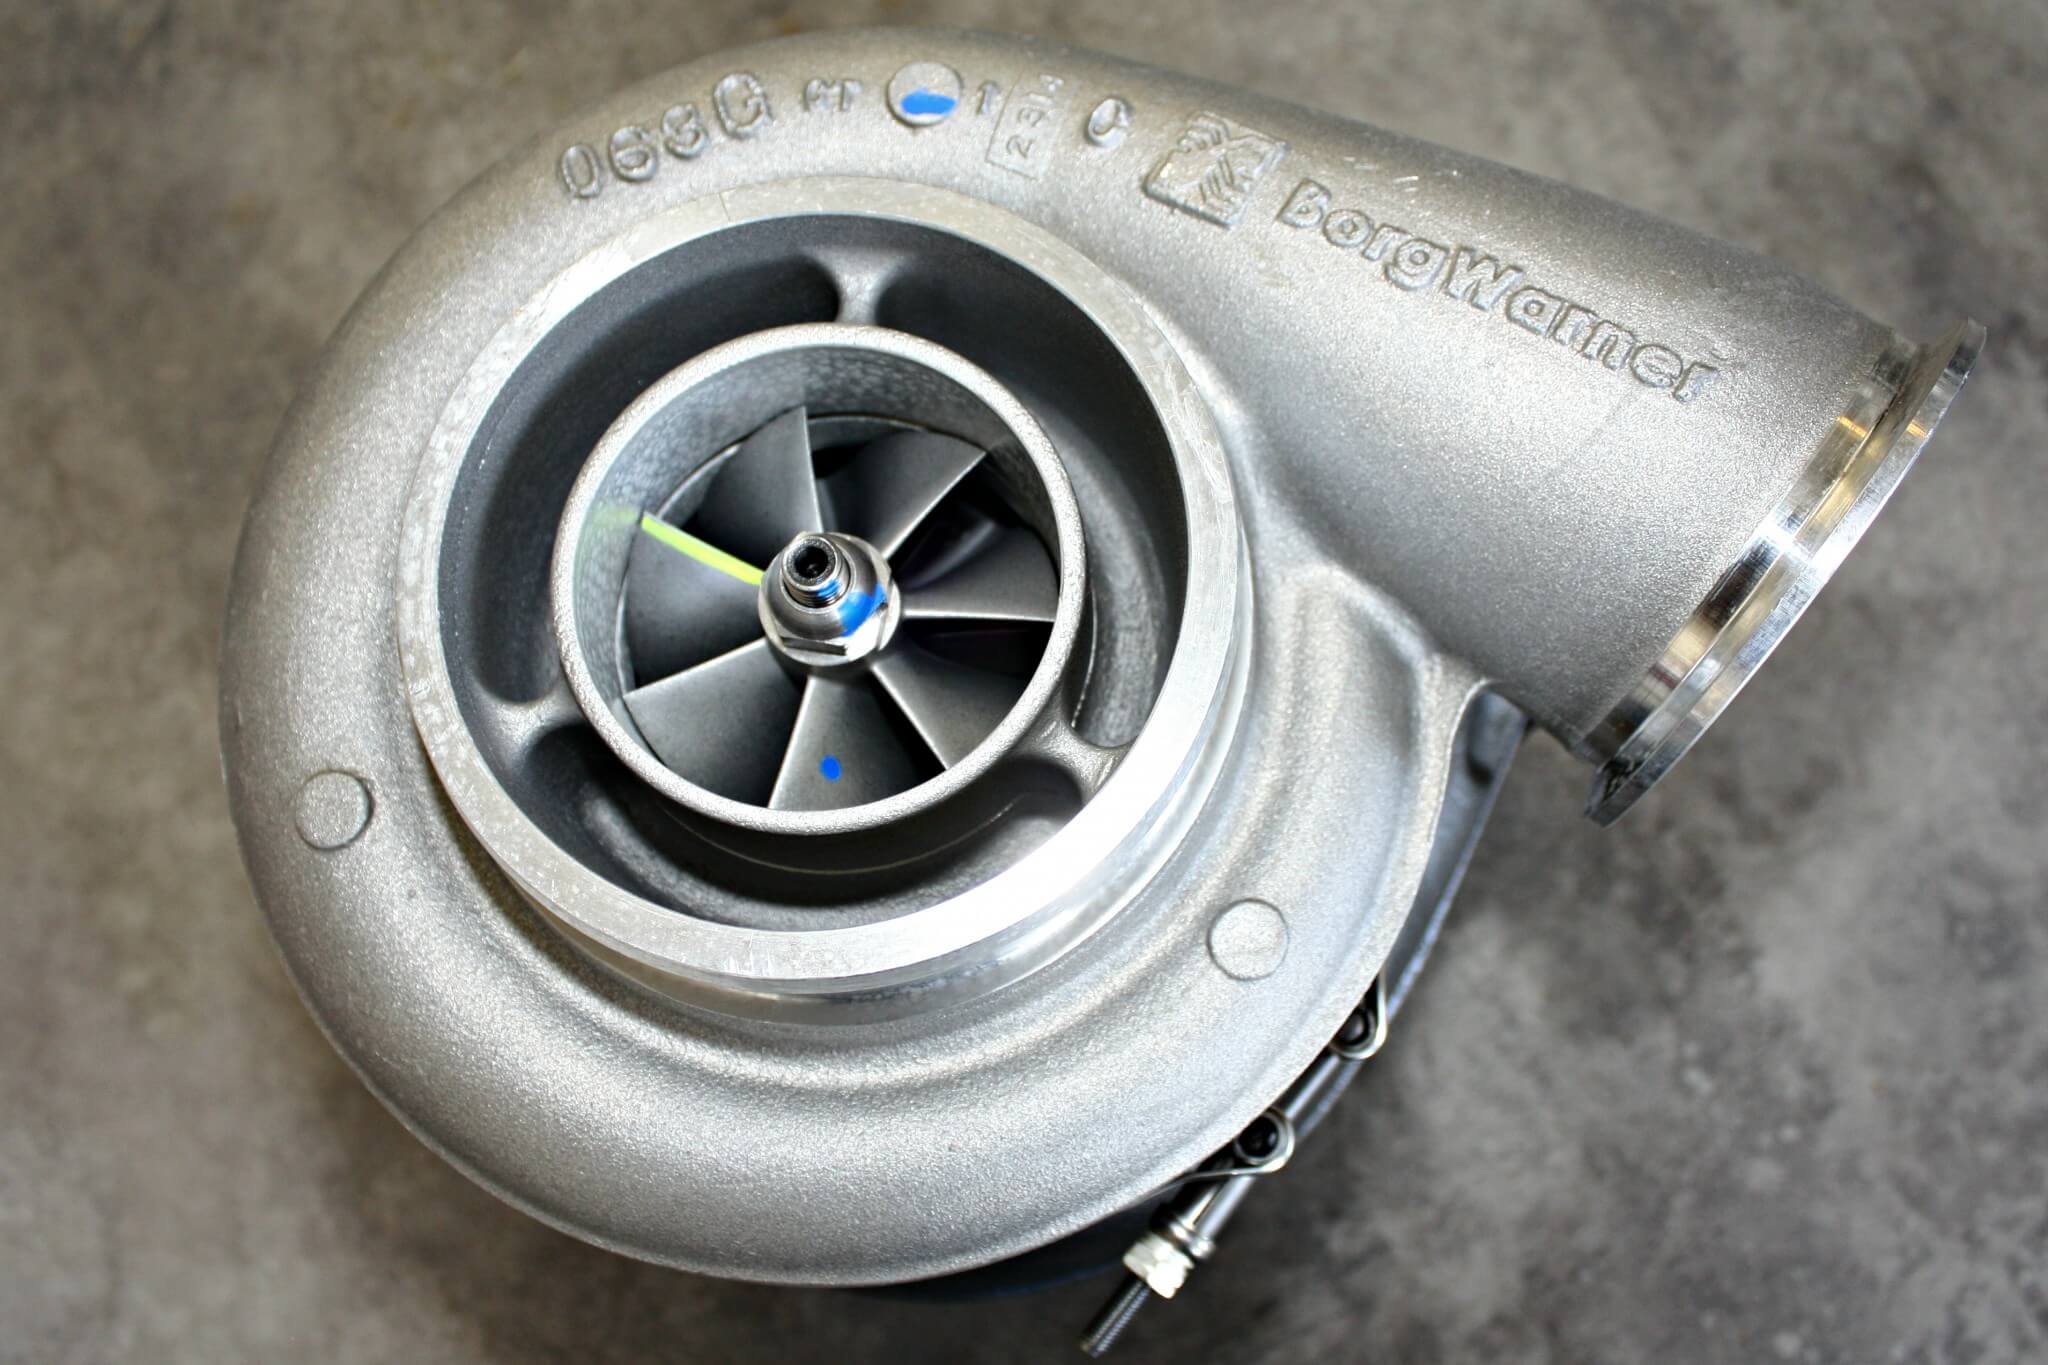 1. The new BorgWarner S475 from High Tech Turbo is a common low-pressure turbo for daily-driven trucks, and should be more than enough air to support 700 hp in the 2003-2007 5.9L application.